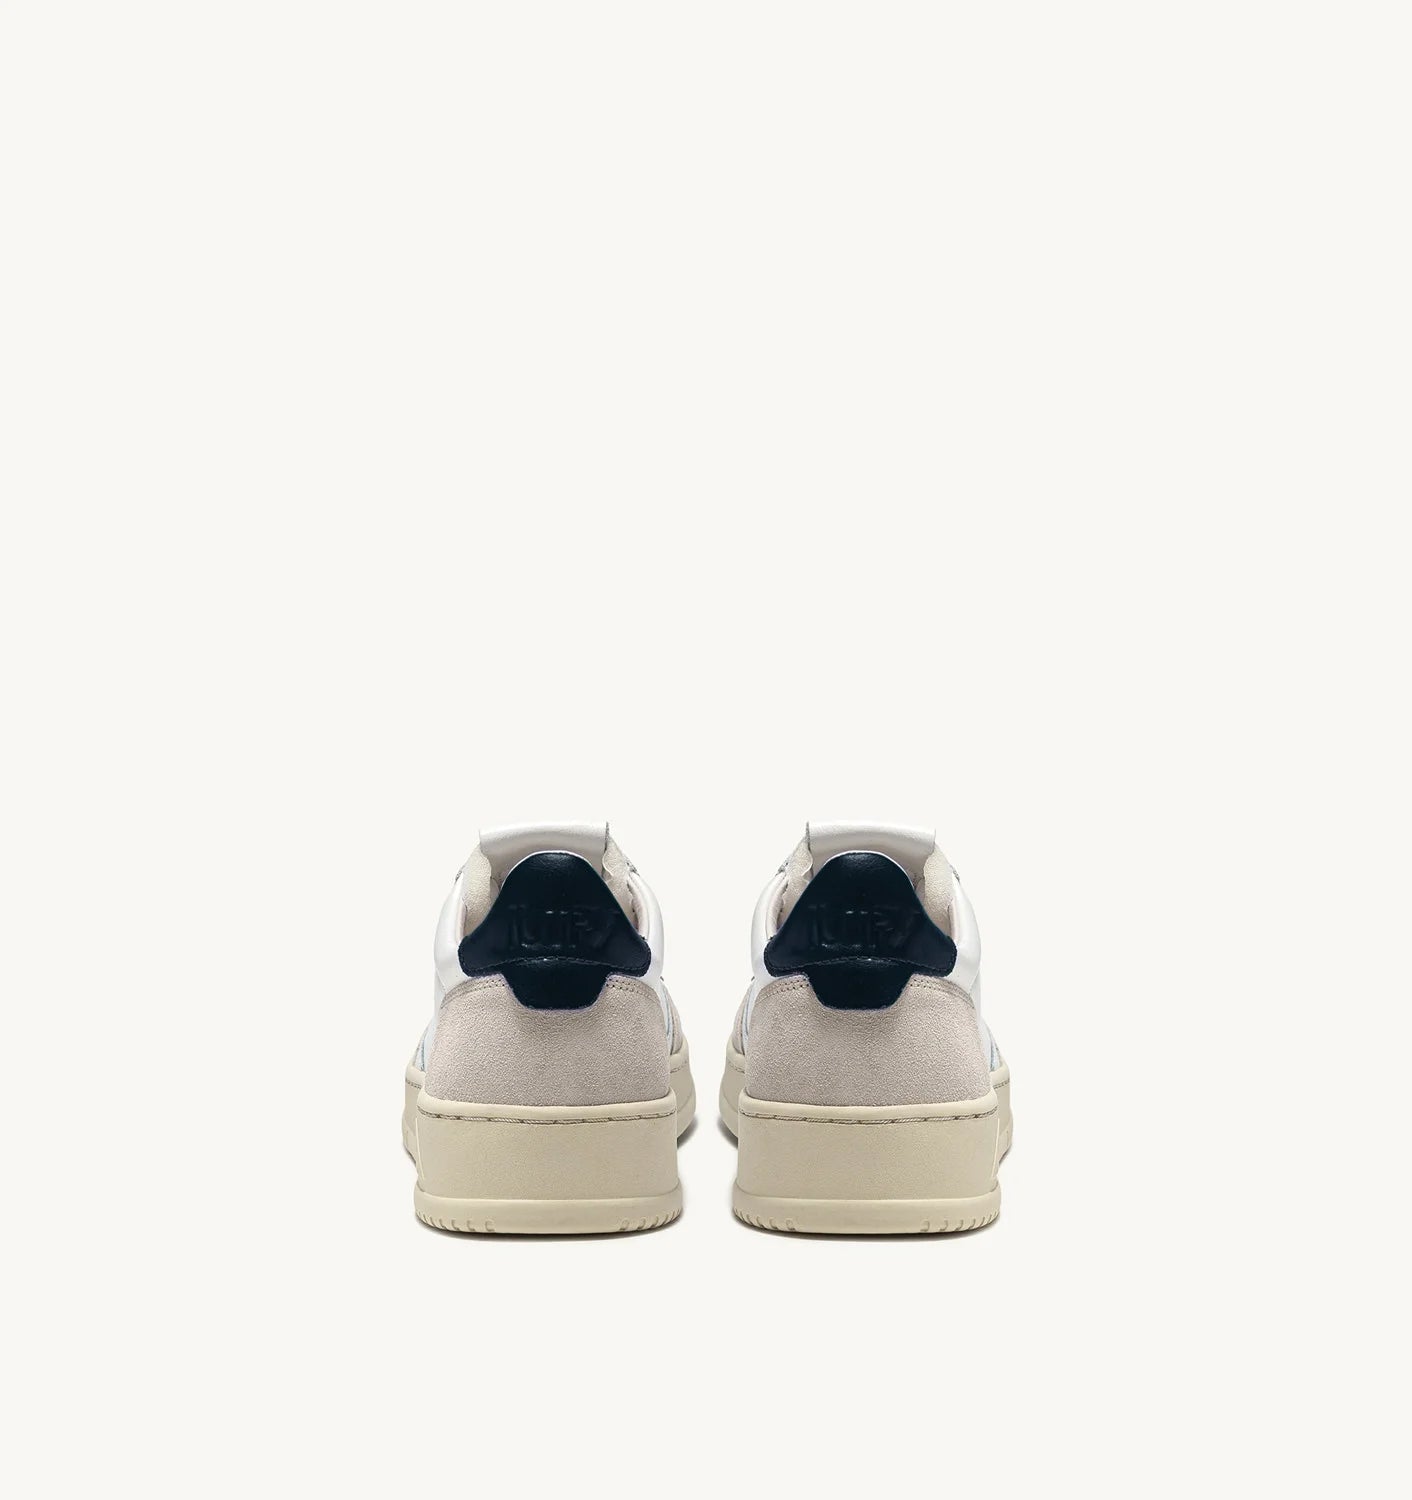 Autry LS28 White/Navy sneakers